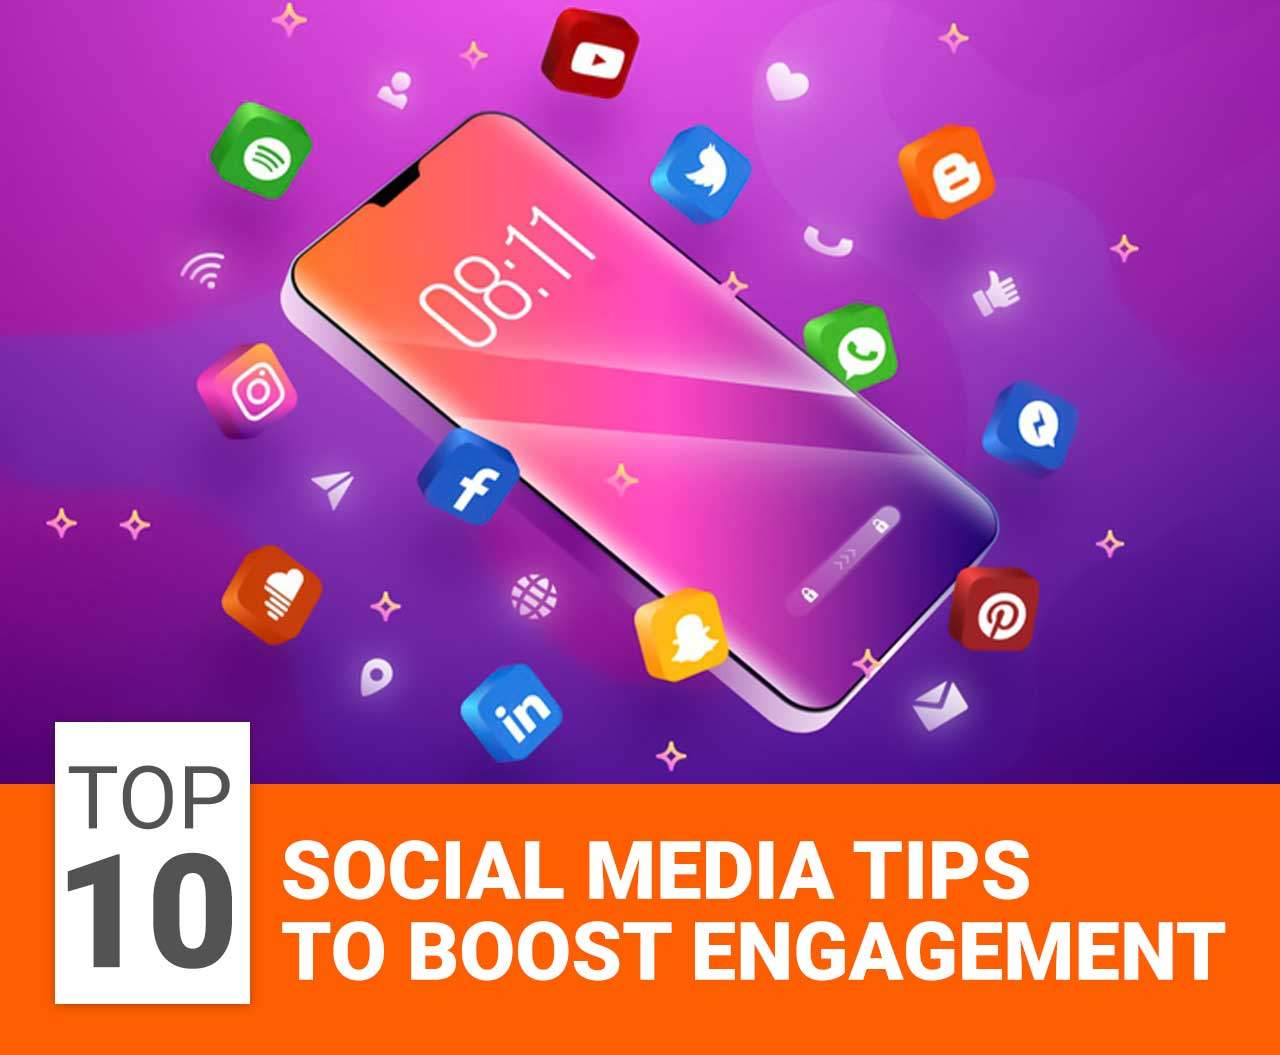 Social Media Tips To Boost Engagement